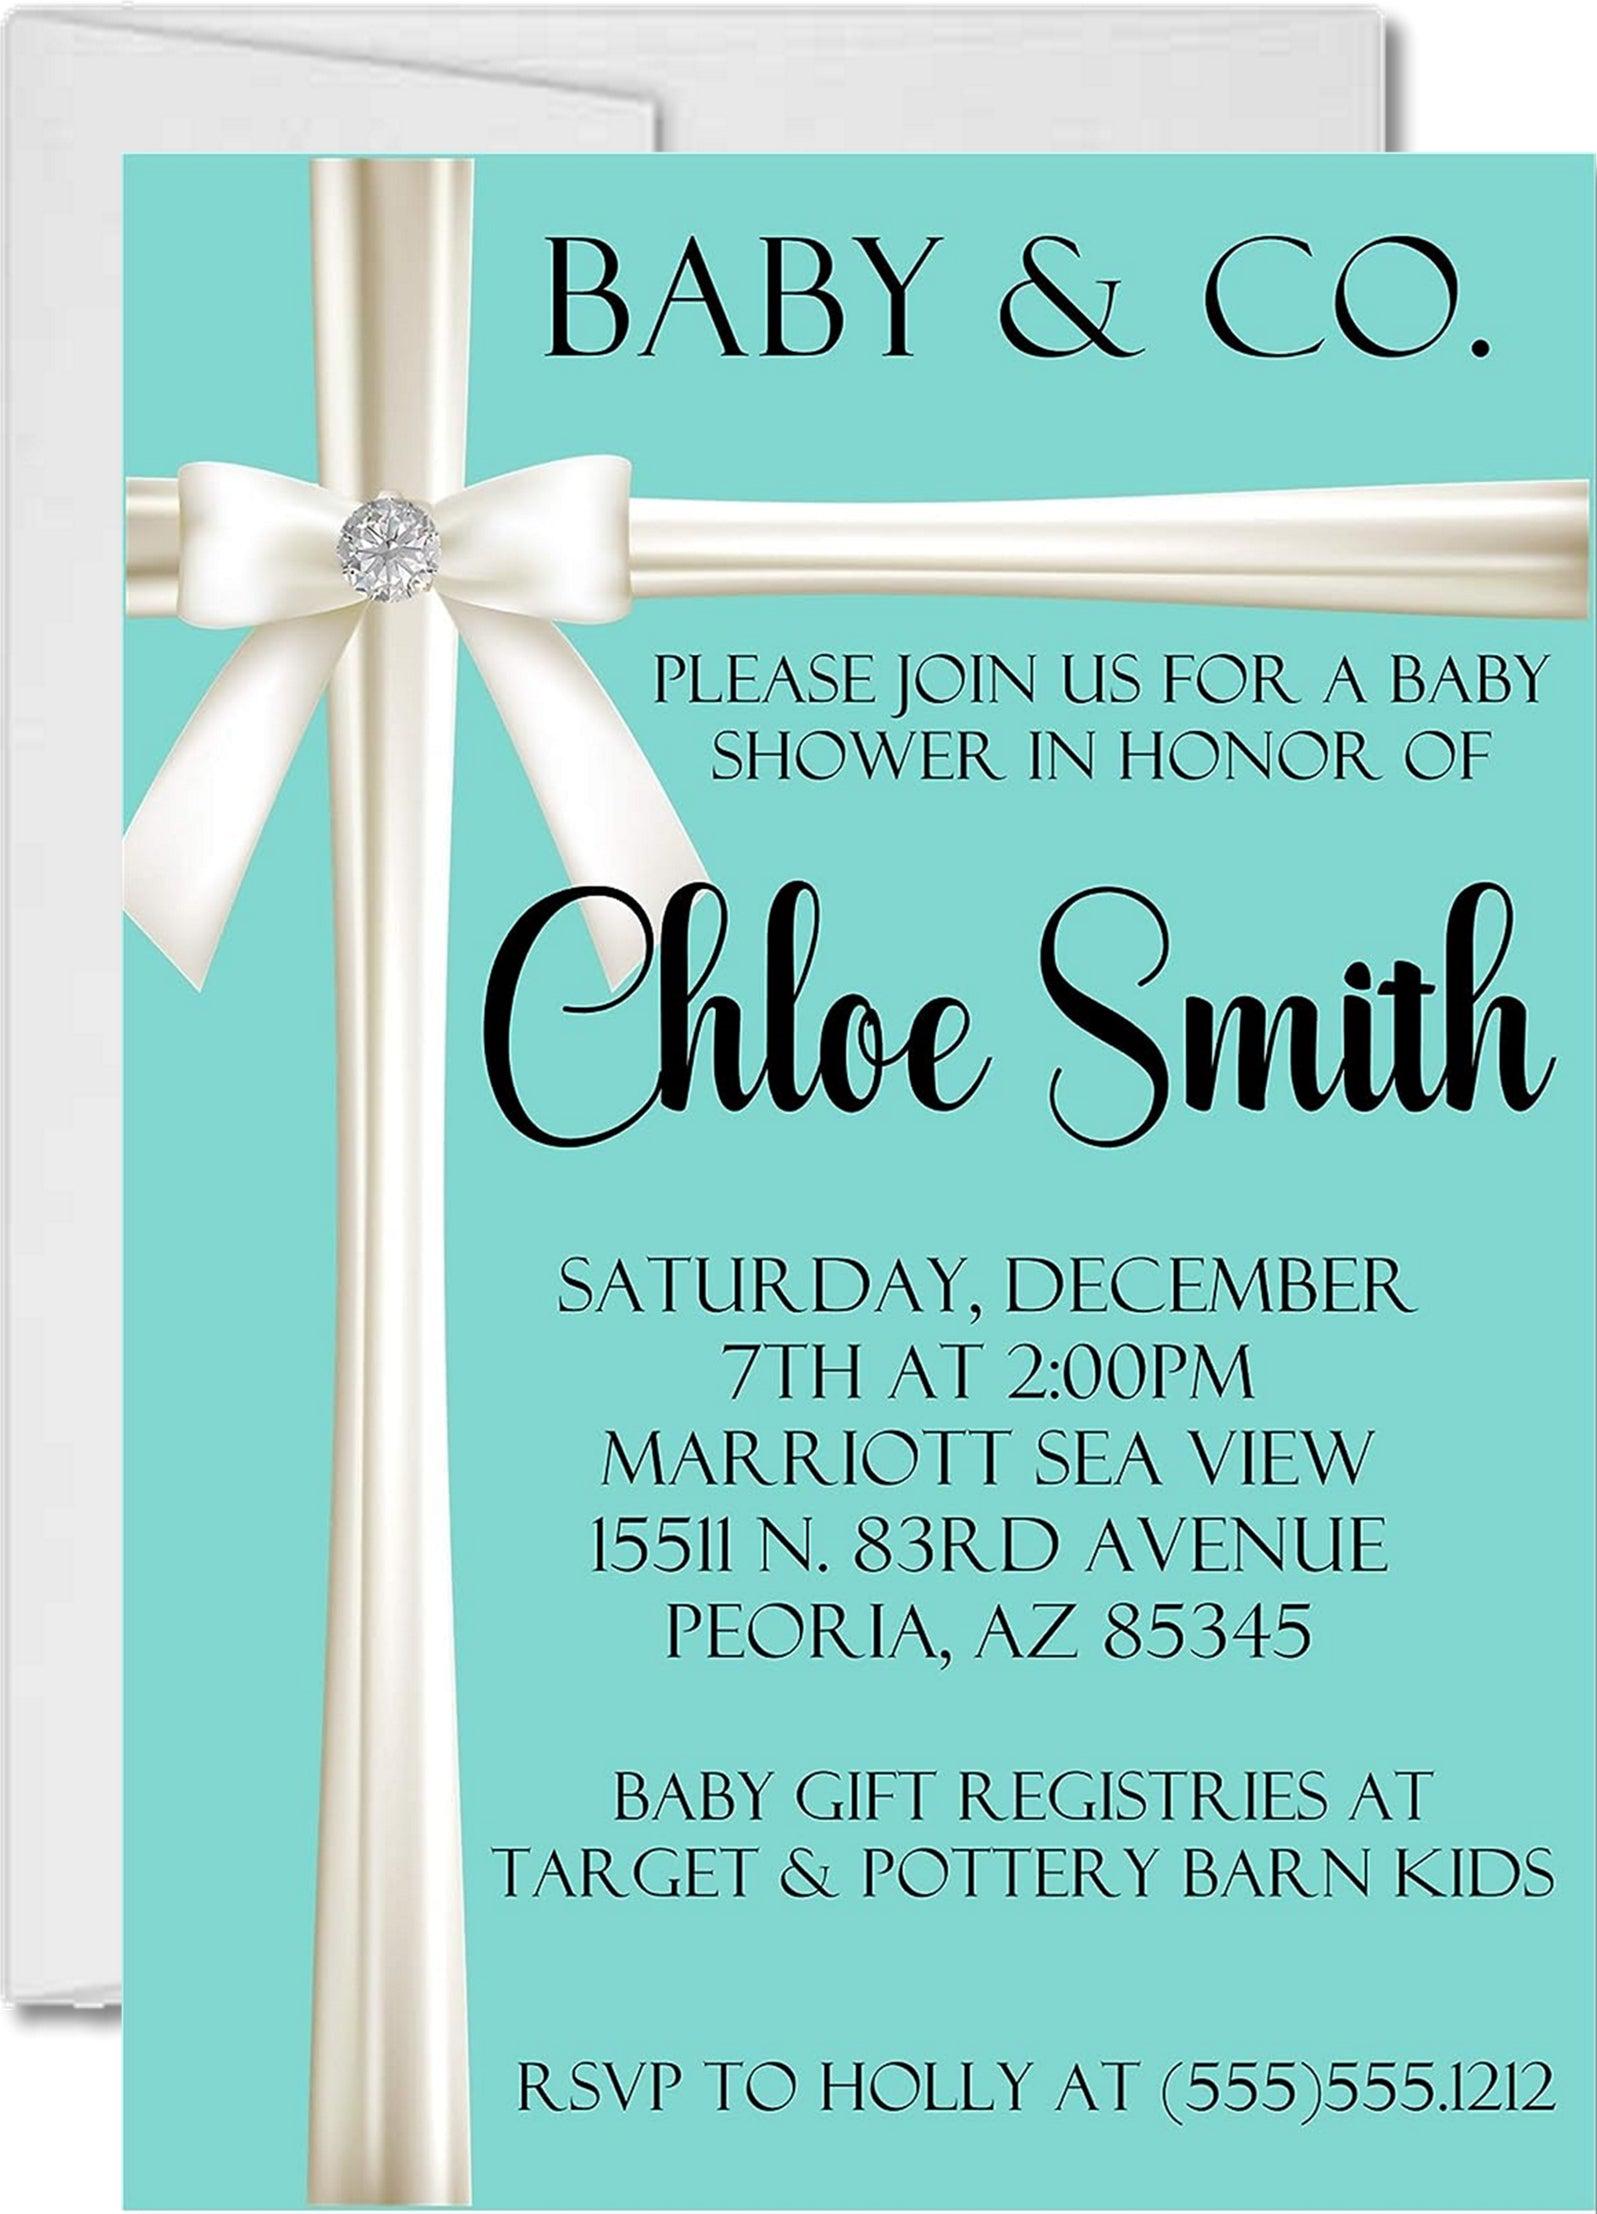 Baby & Co. Baby Shower Invitations